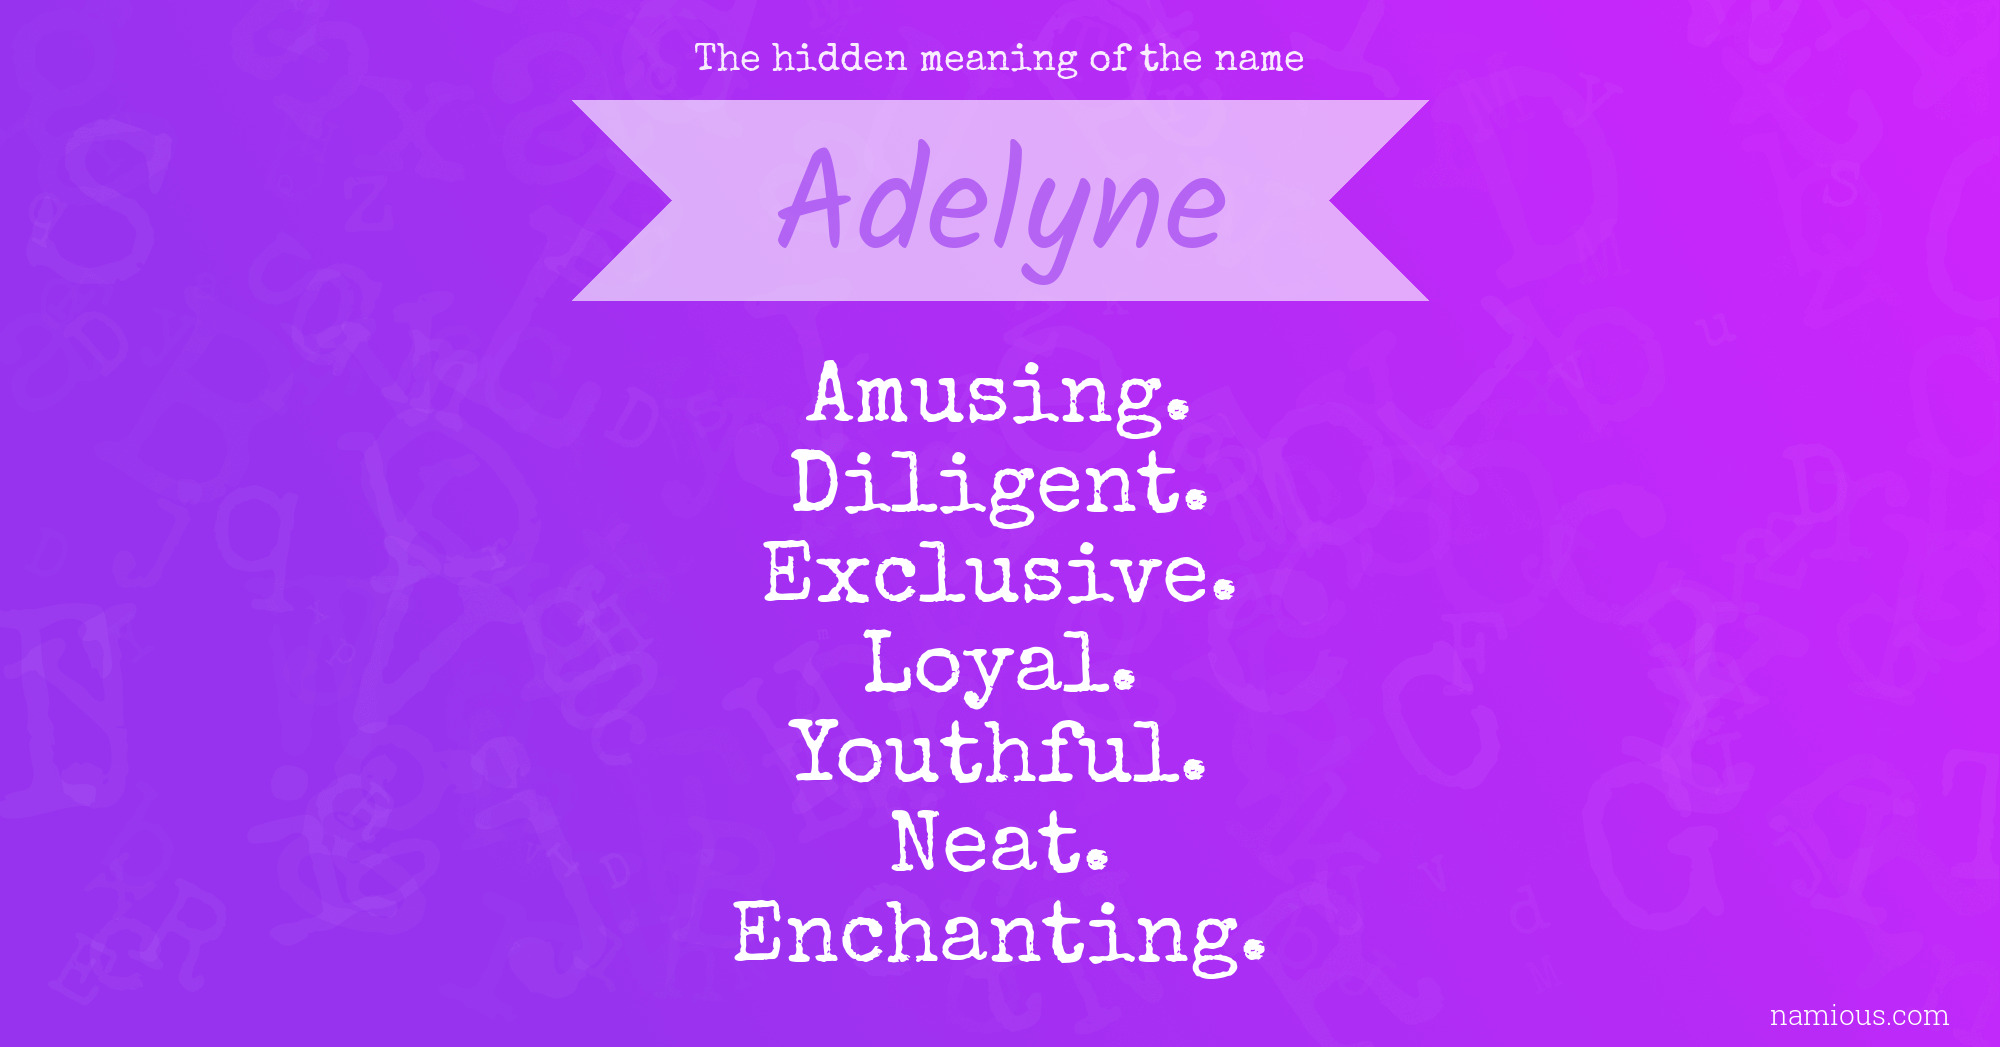 The hidden meaning of the name Adelyne